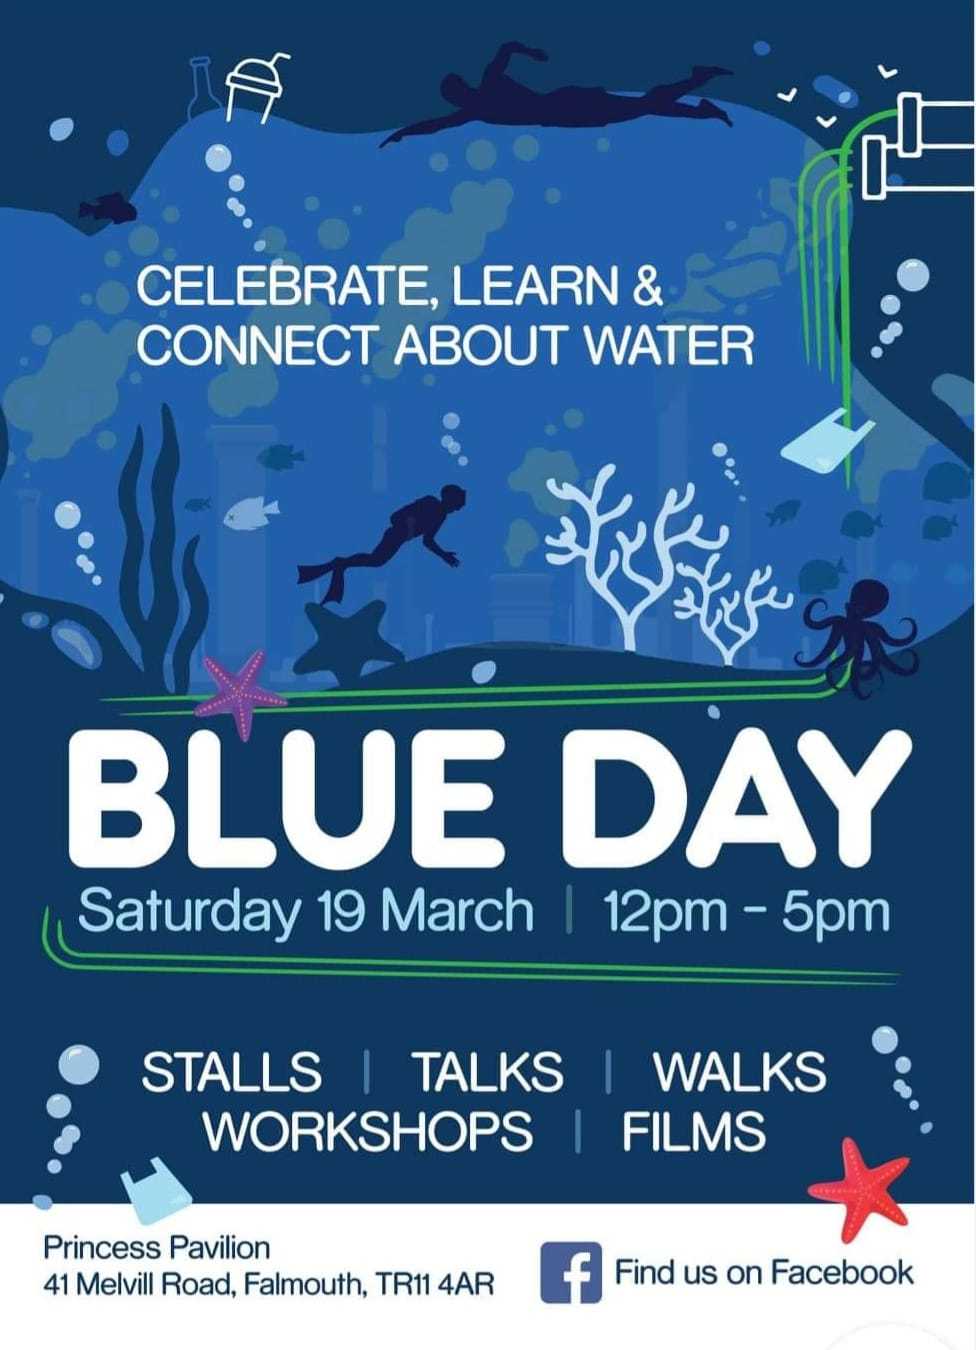 The Blue Day event takes place at the Princess Pavilion this Saturday